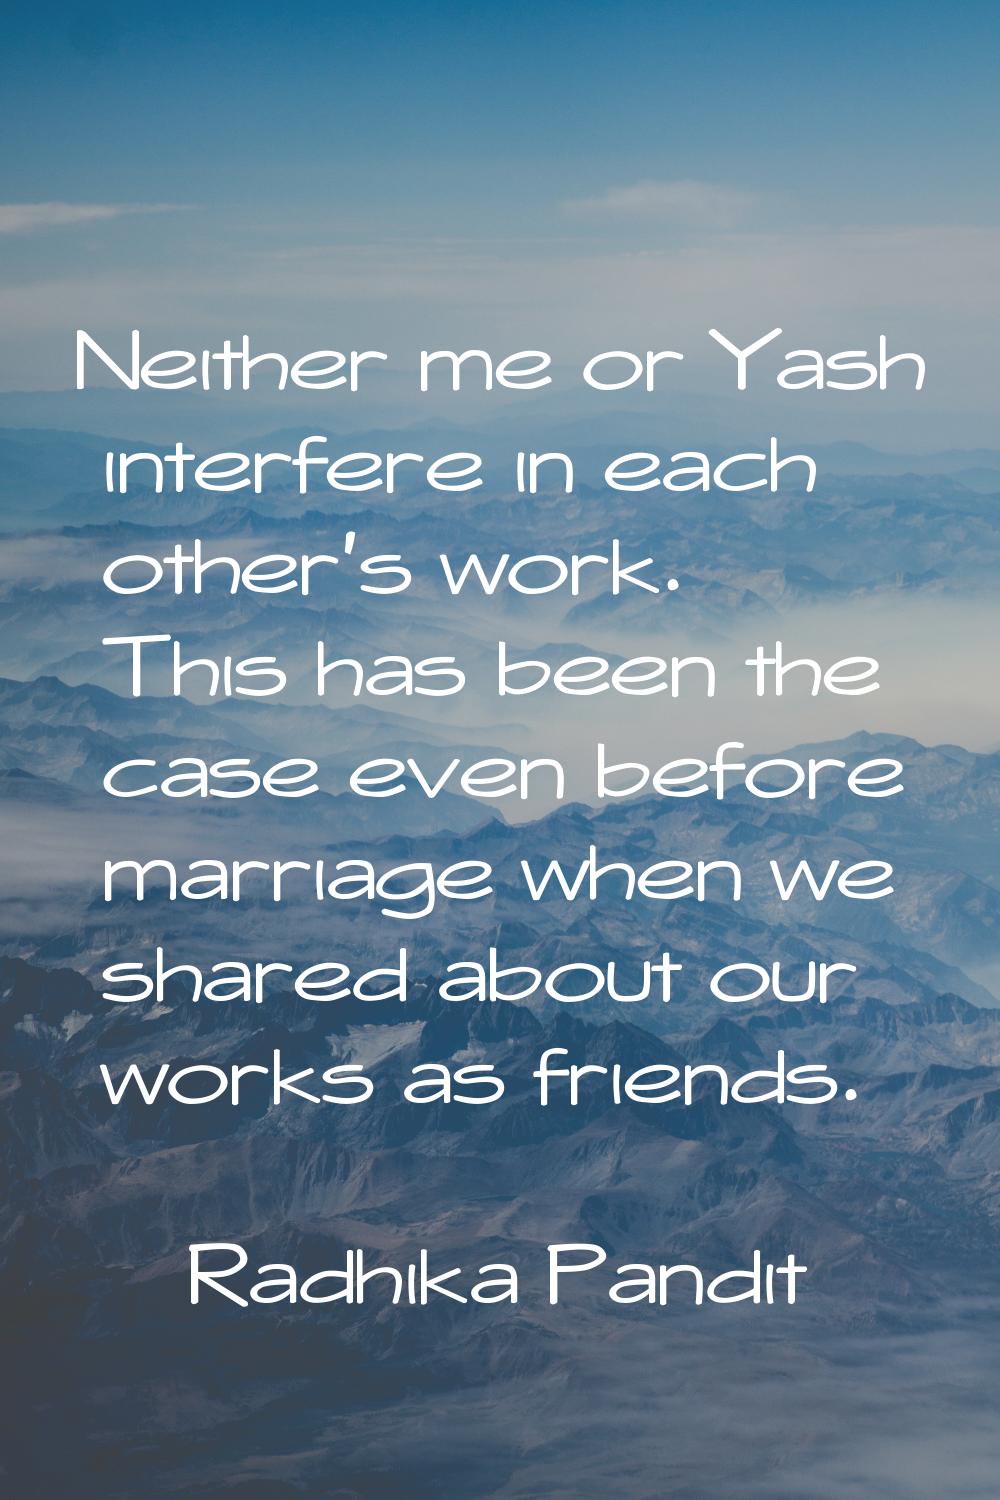 Neither me or Yash interfere in each other's work. This has been the case even before marriage when